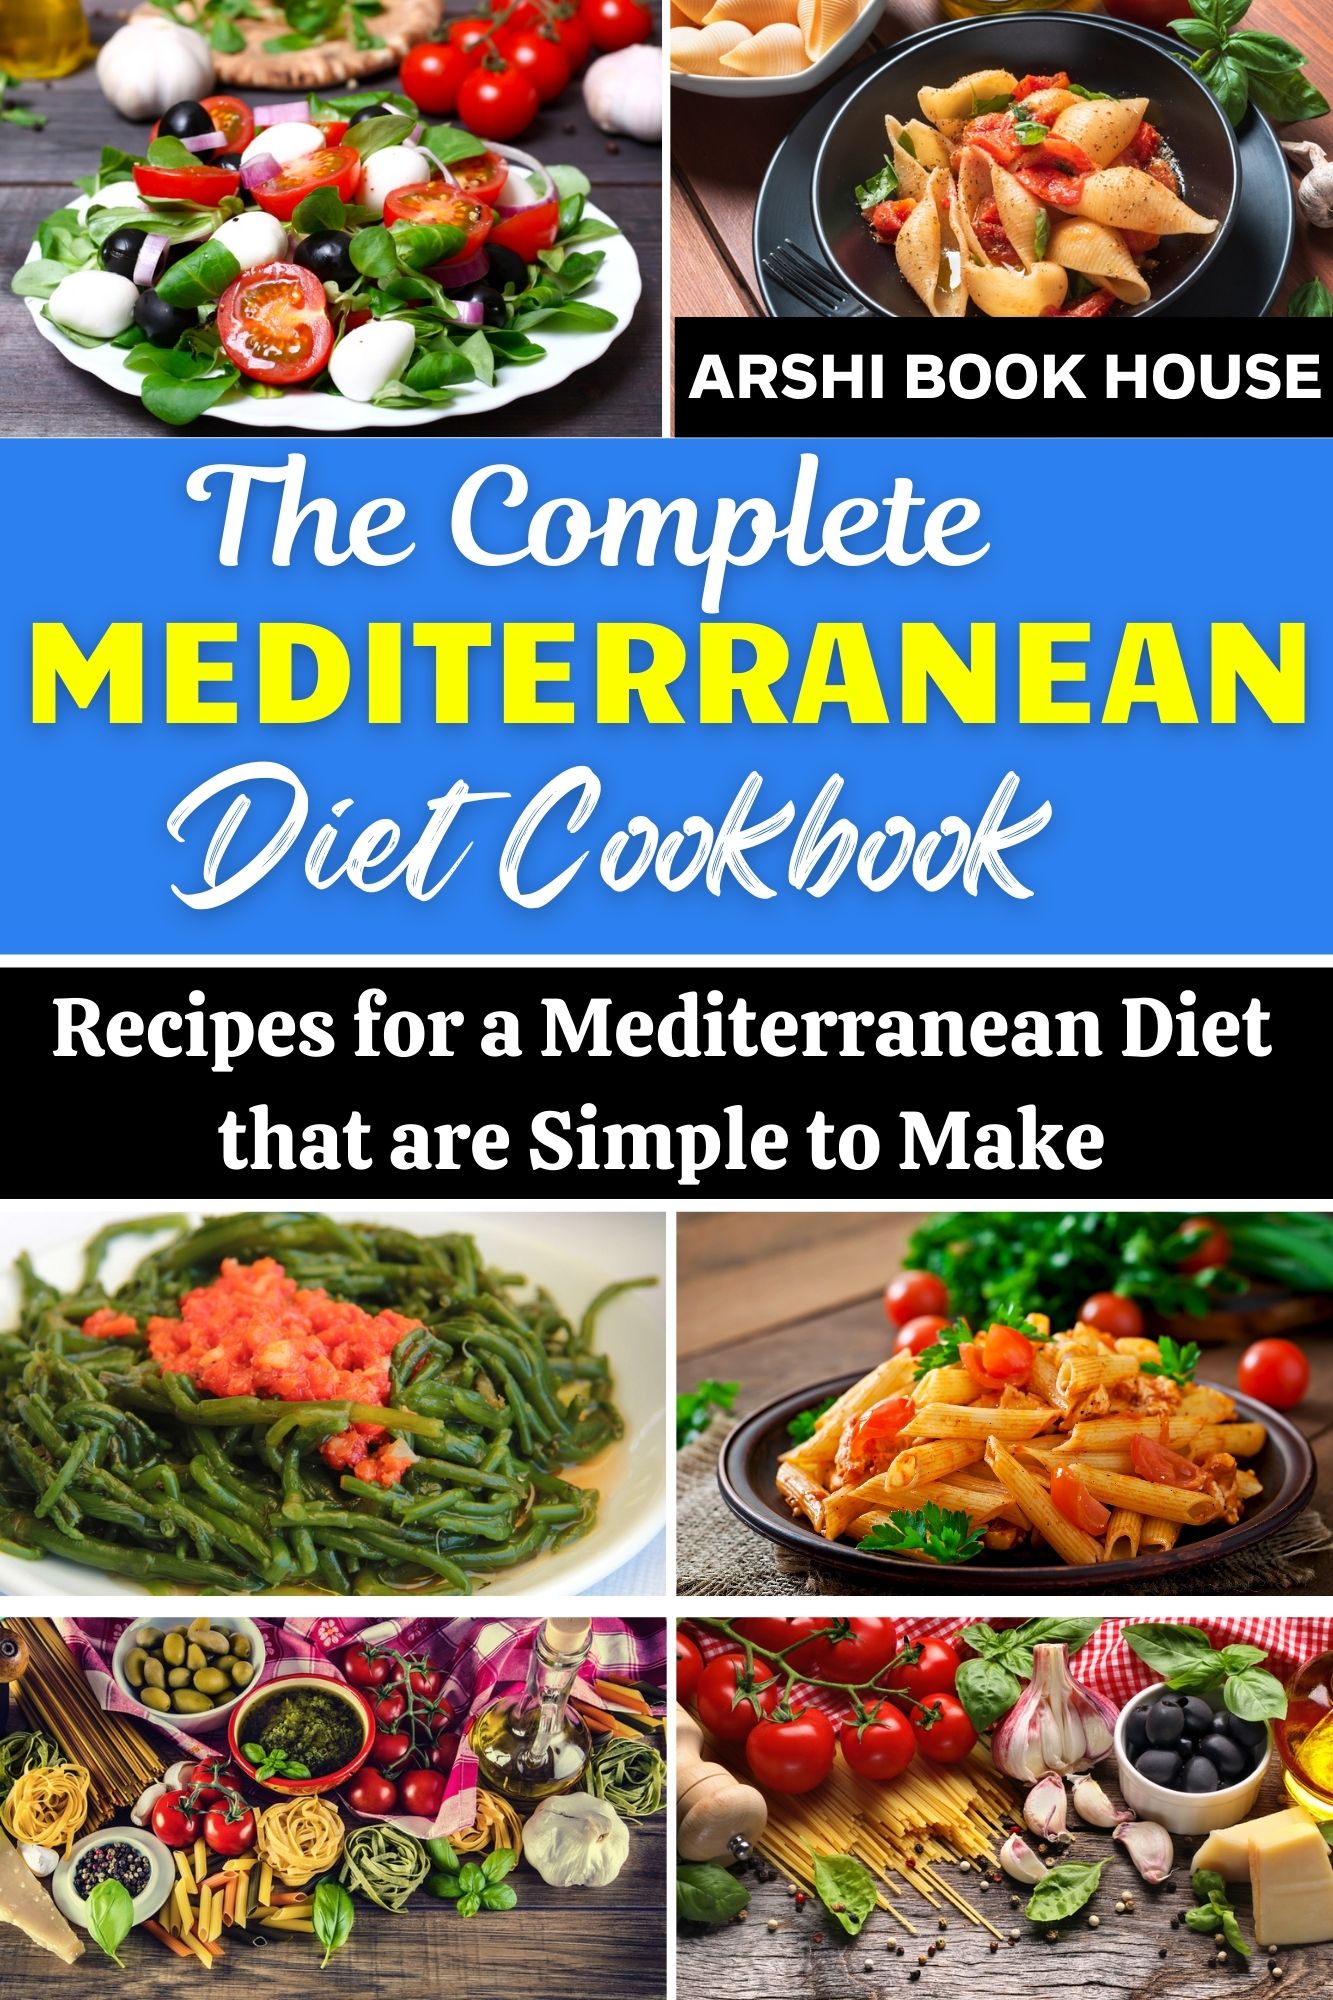 FREE: The Complete Mediterranean Diet Cookbook by Arshi Book House